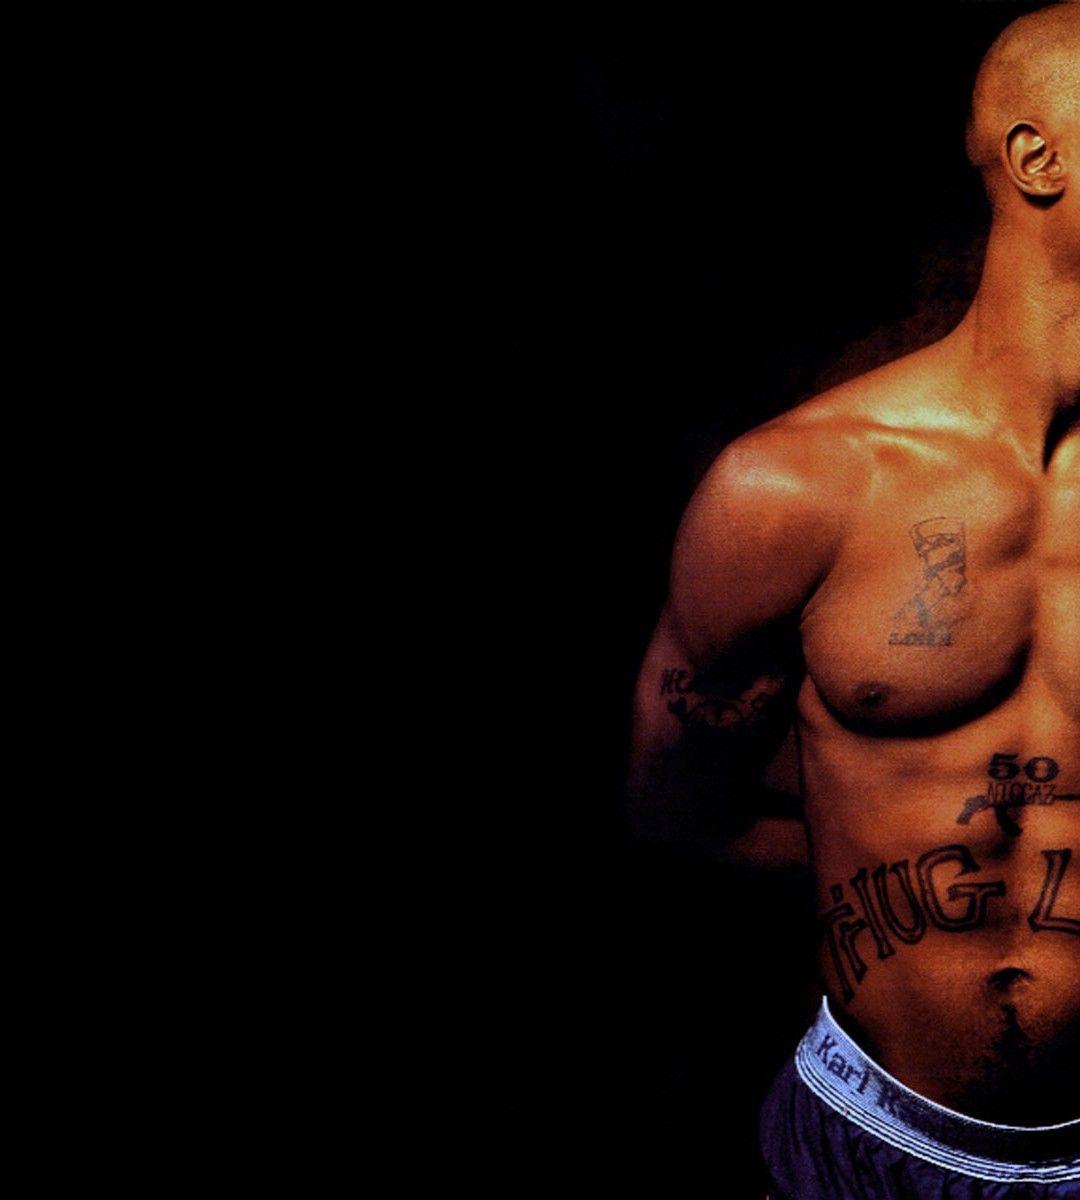 2Pac Wallpaper for iPhone in 2019pac wallpaper, J cole, 2pac